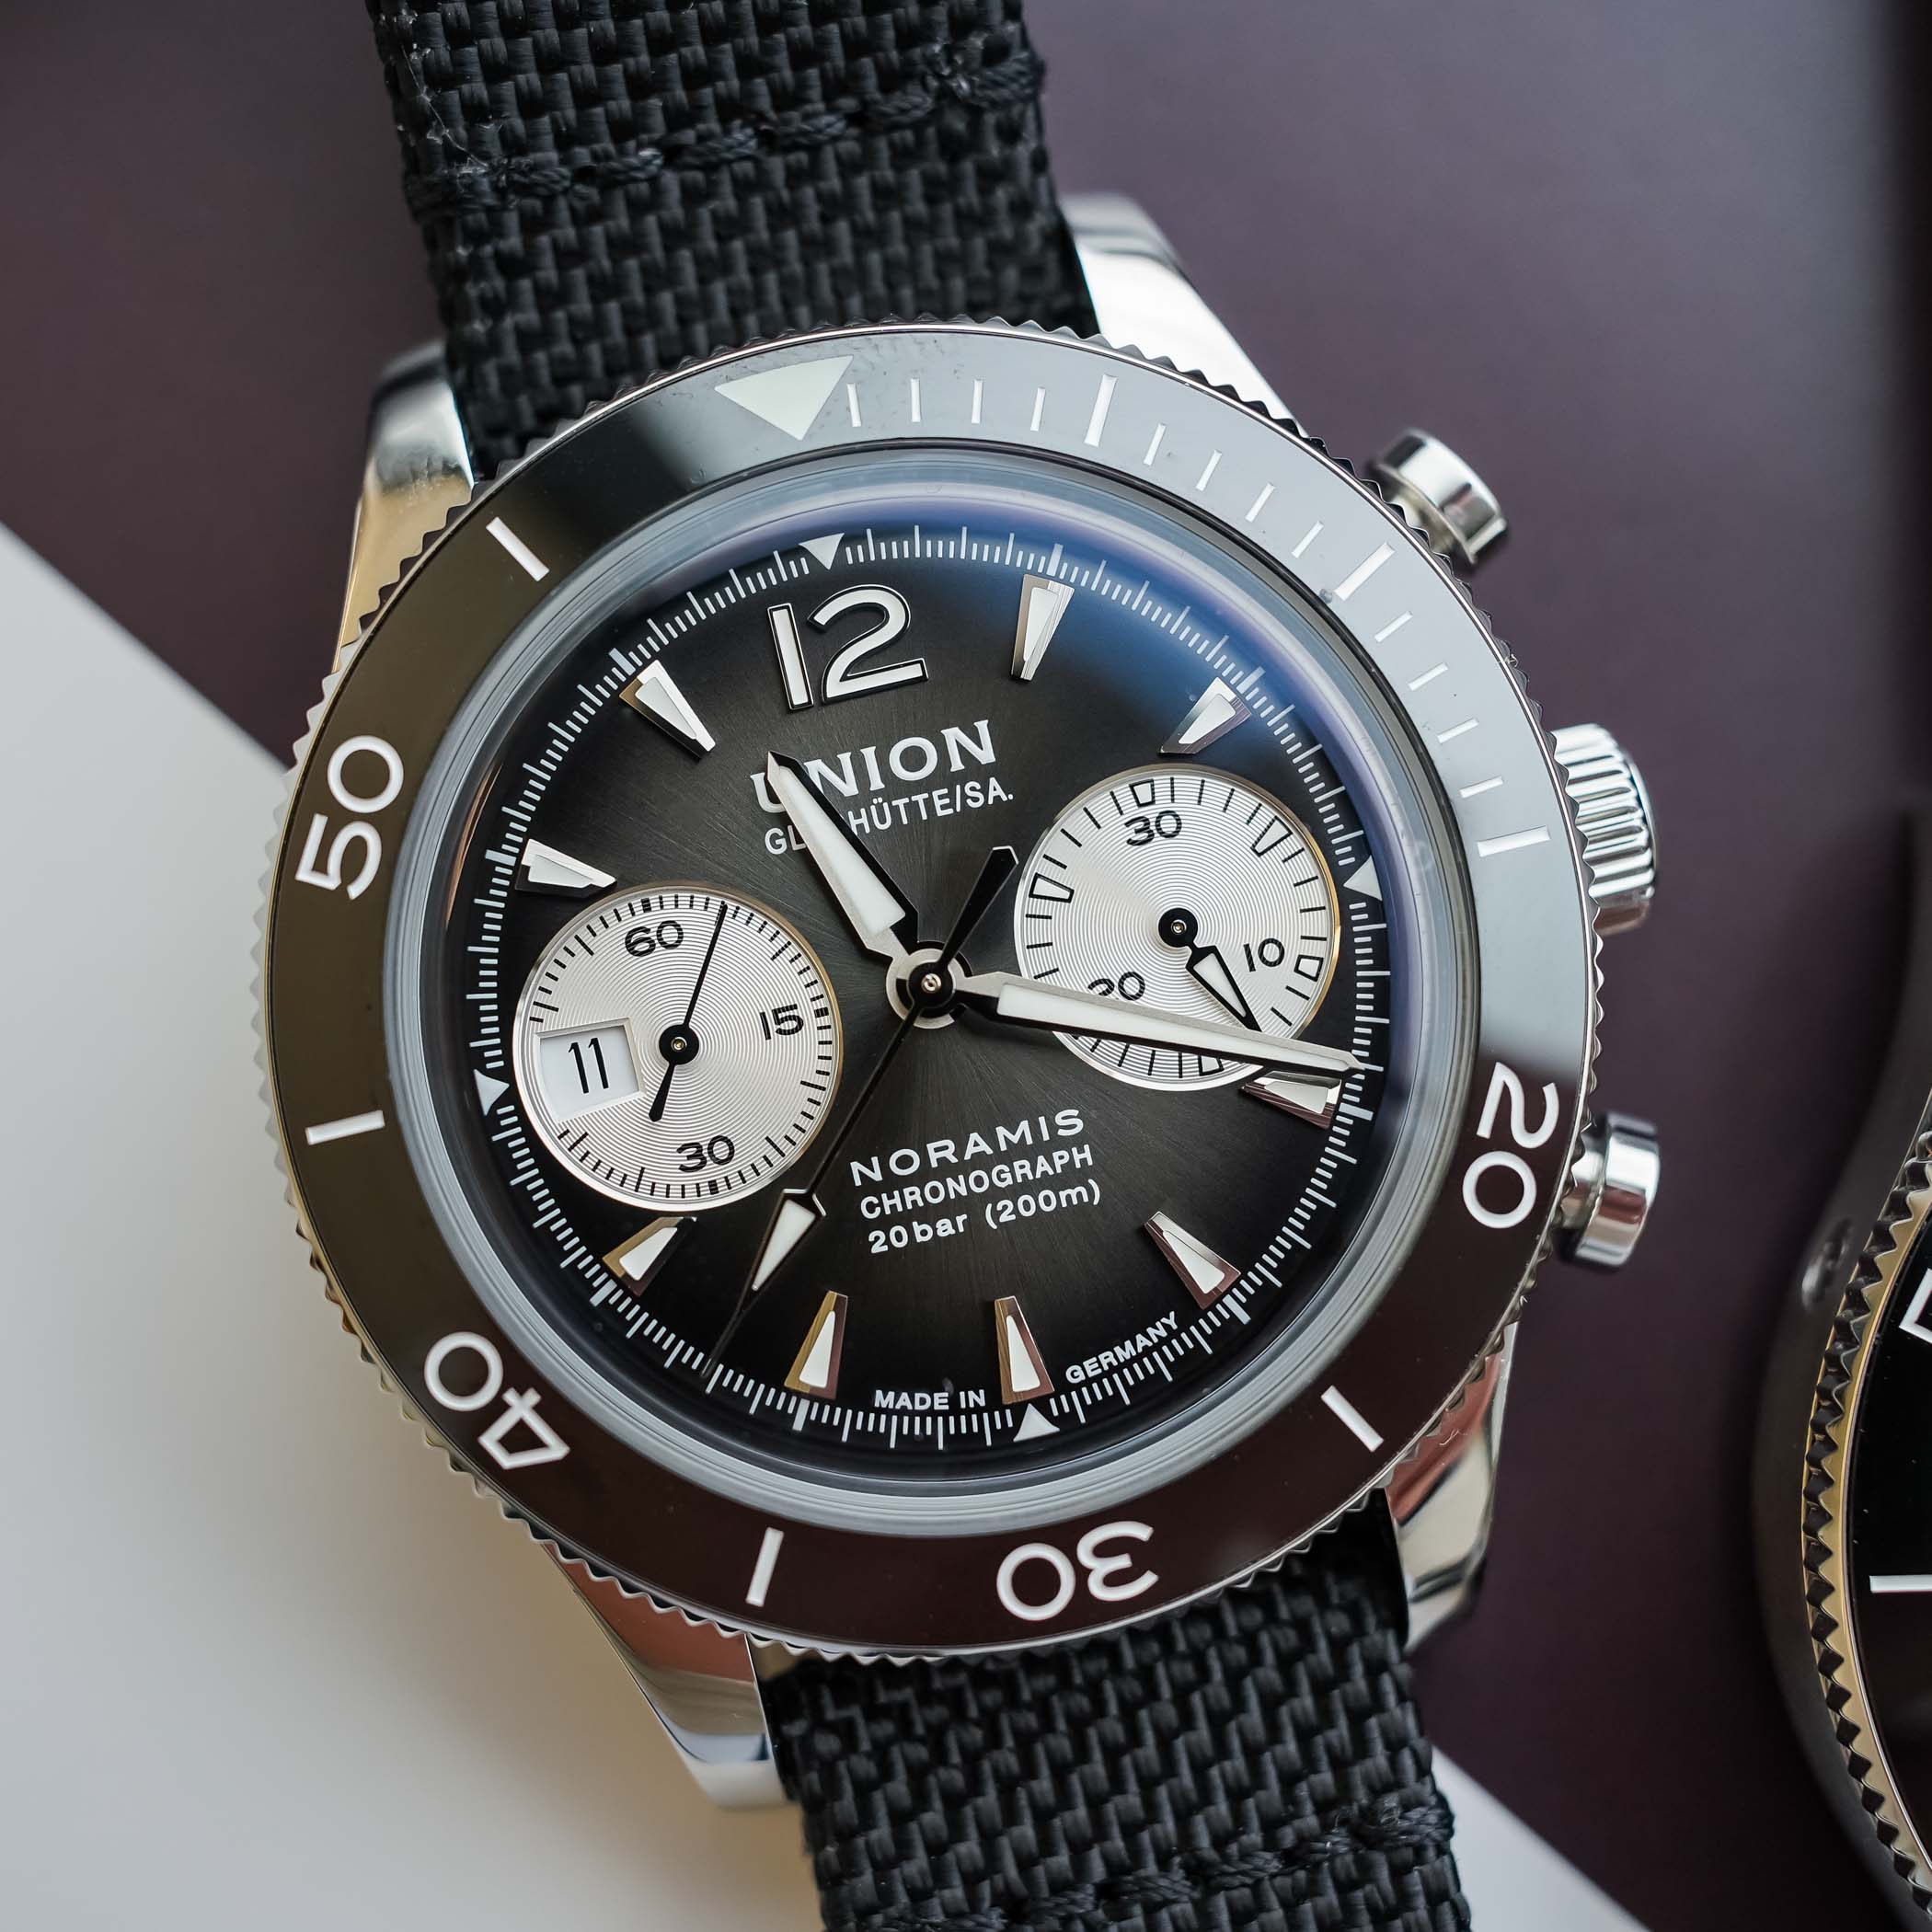 Union Glashutte Noramis Chronograph Sport - diving chronograph - hands-on - 4